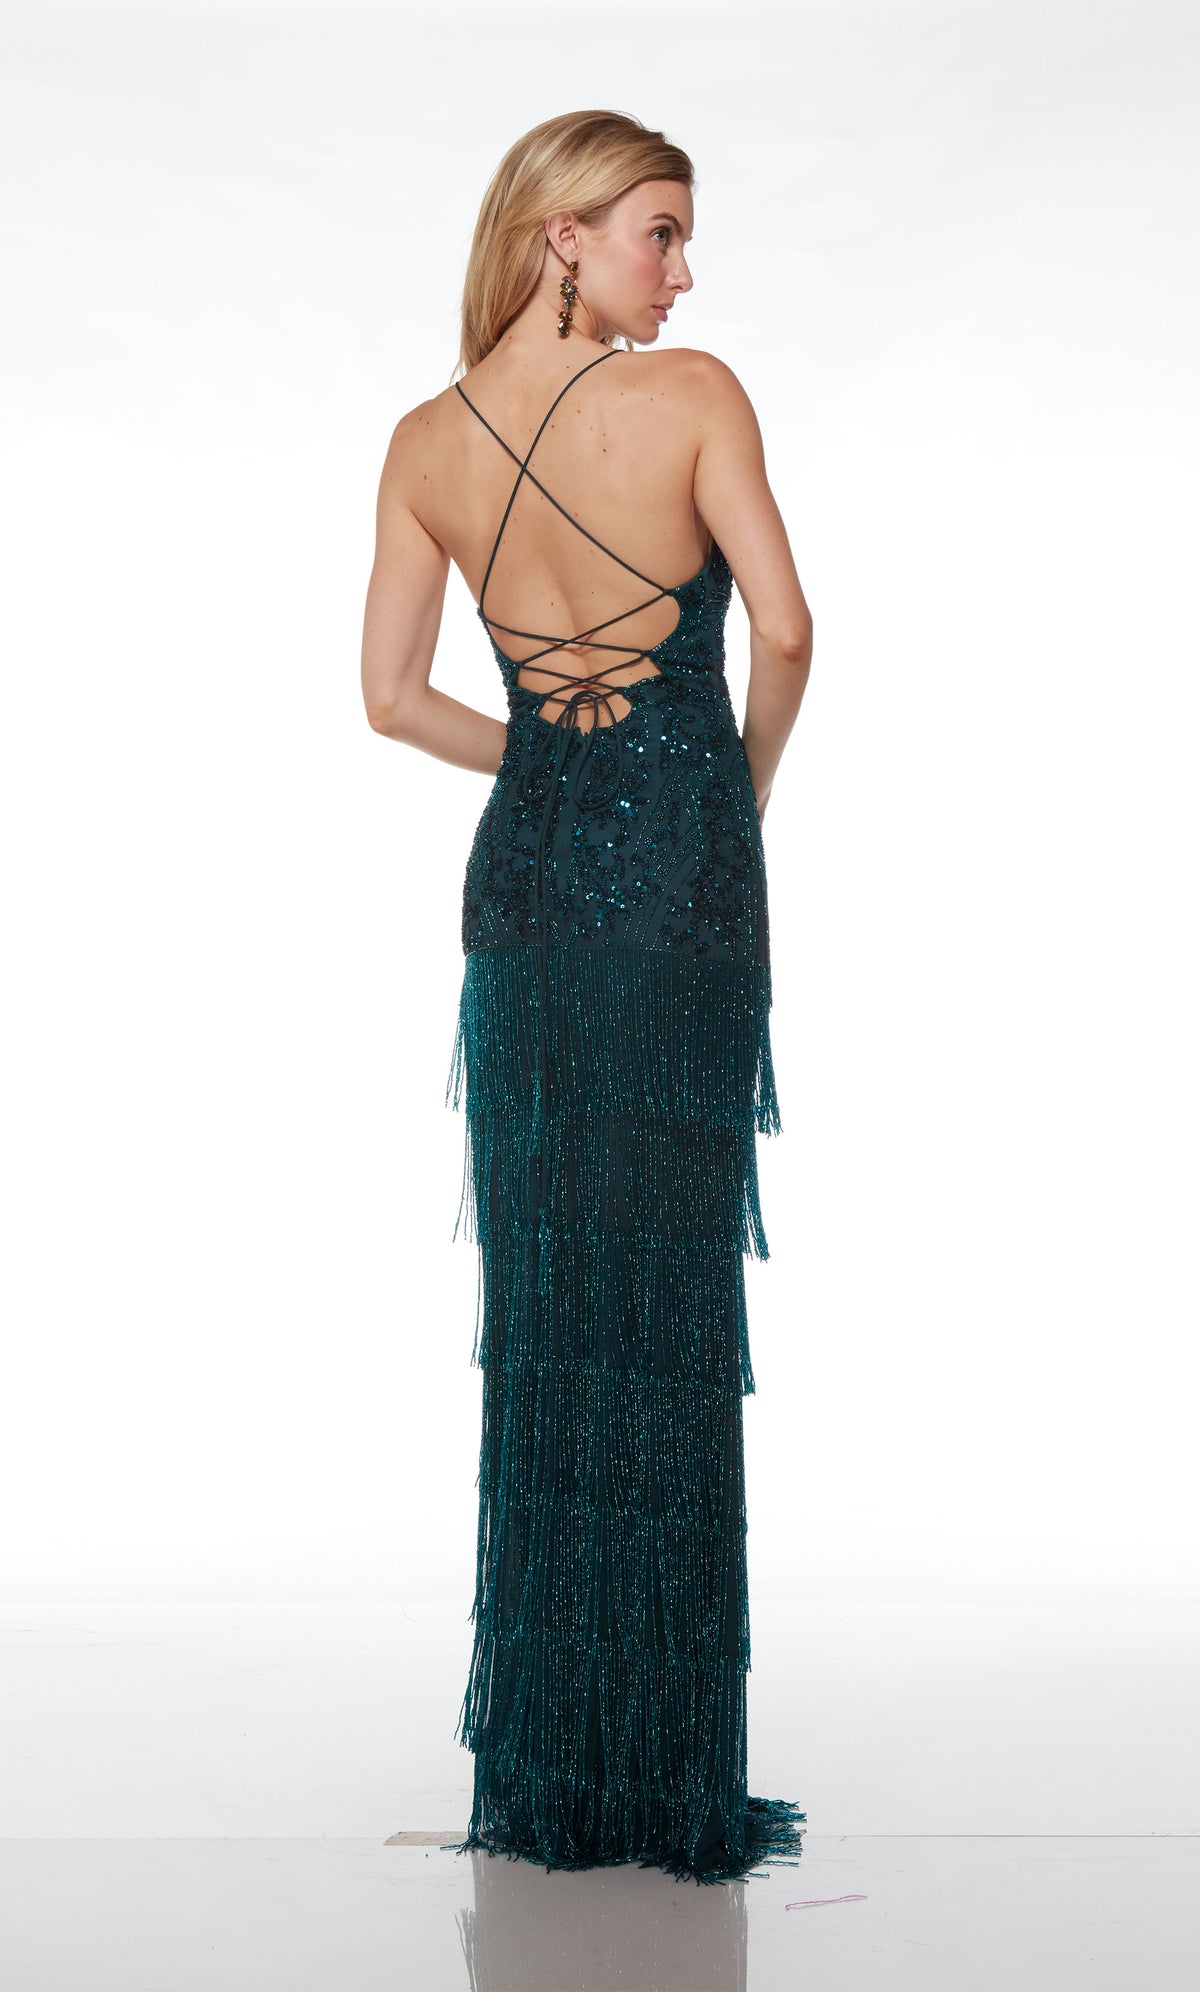 Breathtaking green fringe designer dress with an V neckline, sheer bodice, high slit, crisscross lace-up back, and intricate sequin detail for an stunning and stylish look.